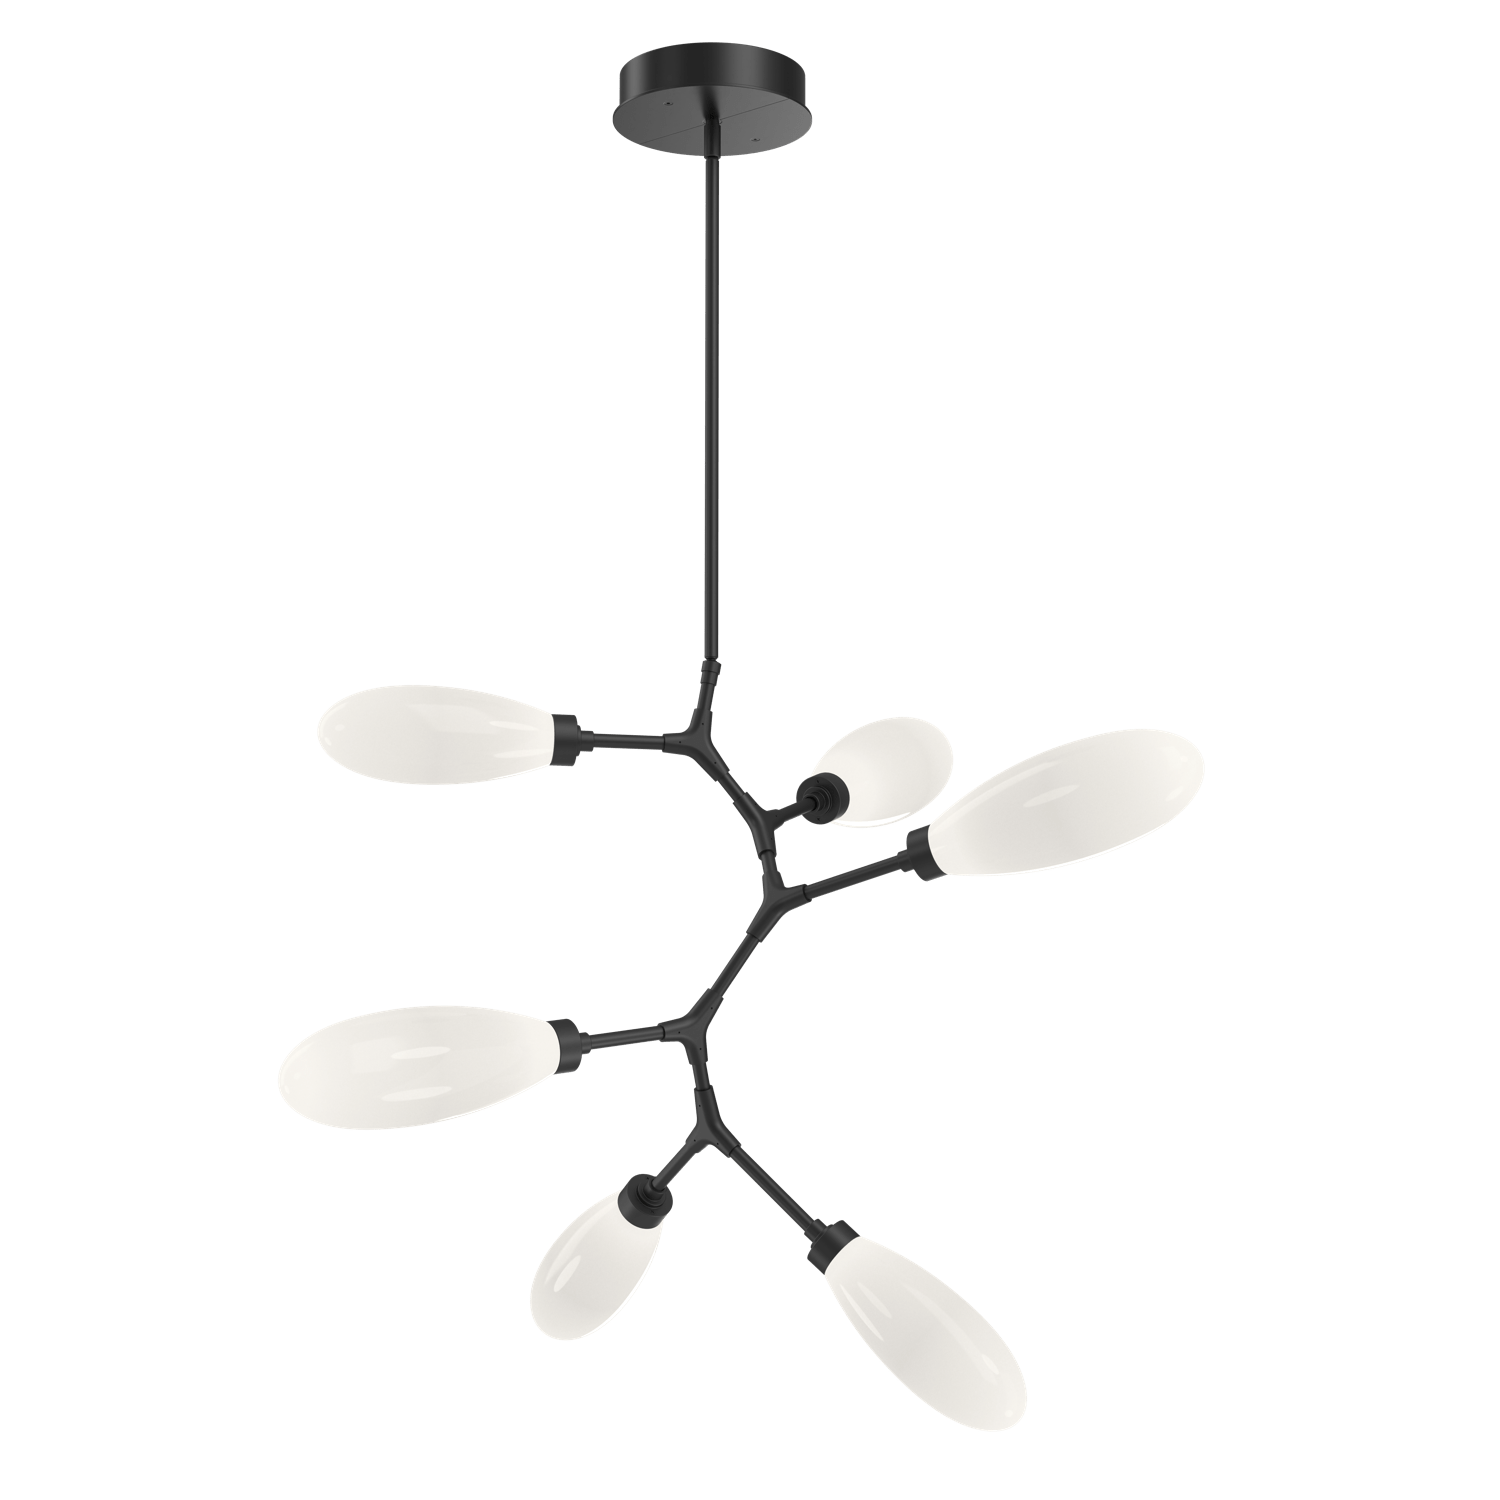 CHB0071-VA-MB-WL-LL-Hammerton-Studio-Fiori-6-light-organic-vine-chandelier-with-matte-black-finish-and-opal-white-glass-shades-and-LED-lamping